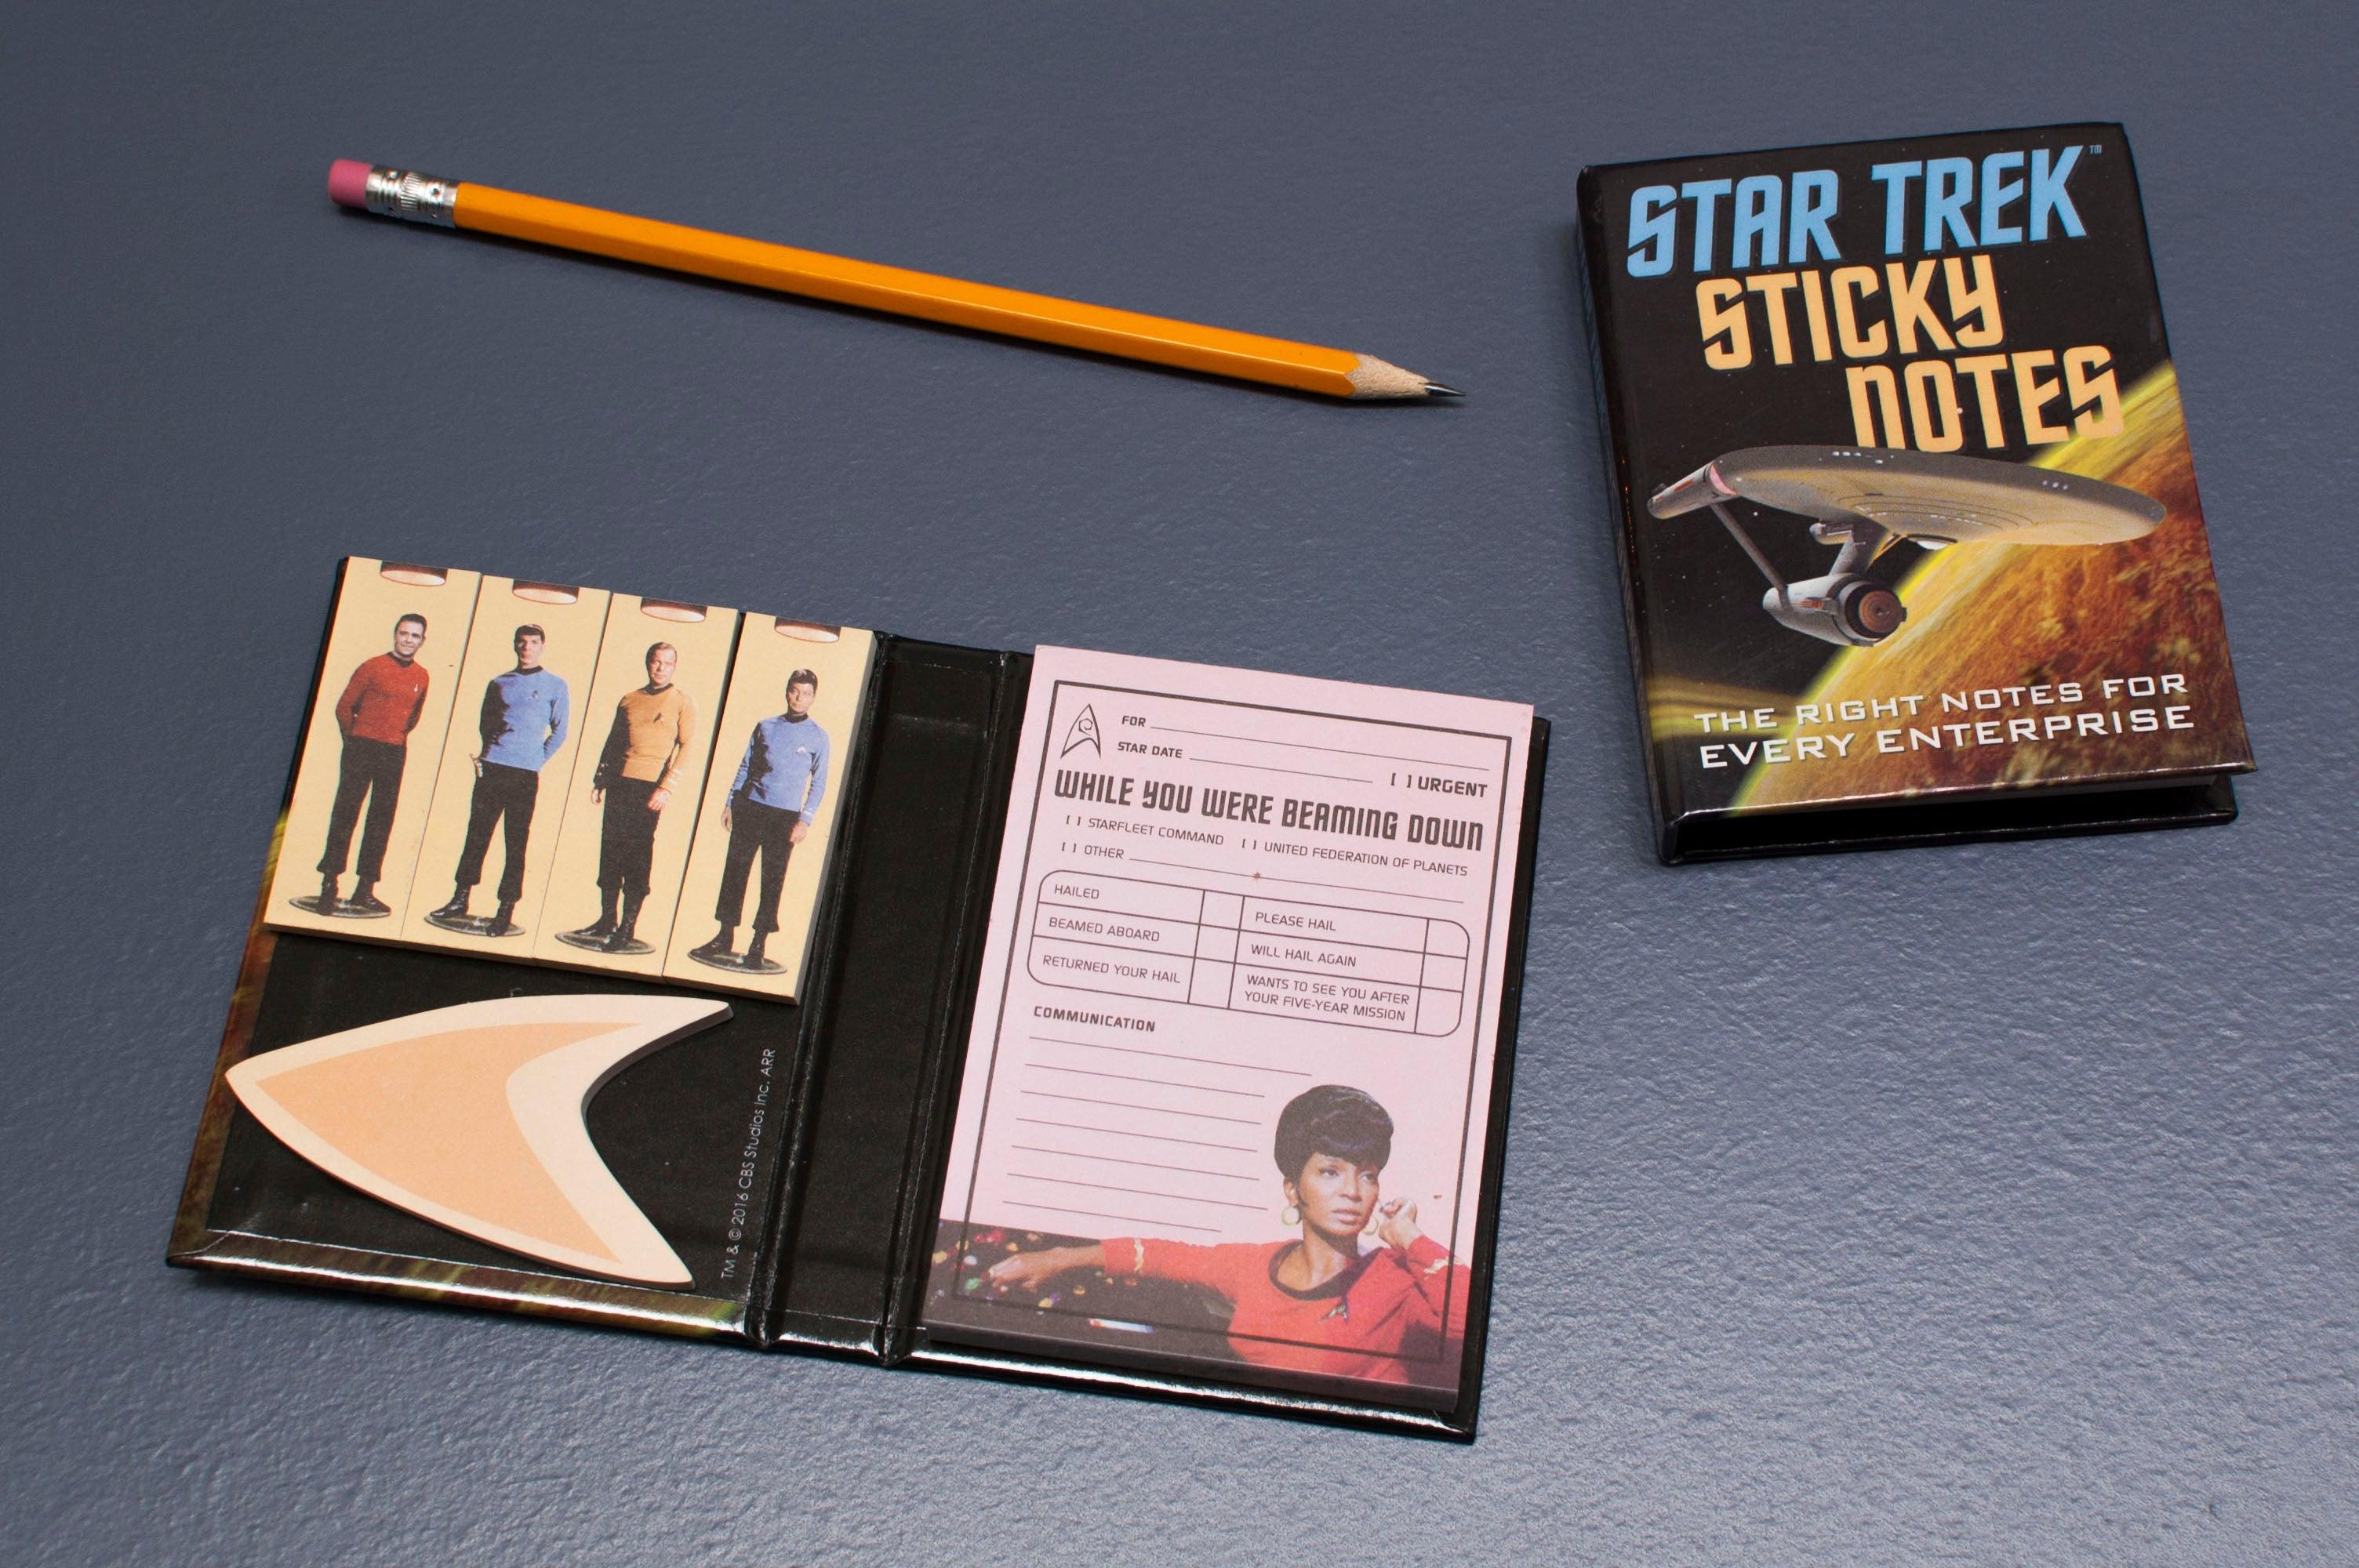 Product photo of Star Trek Sticky Notes, a novelty gift manufactured by The Unemployed Philosophers Guild.